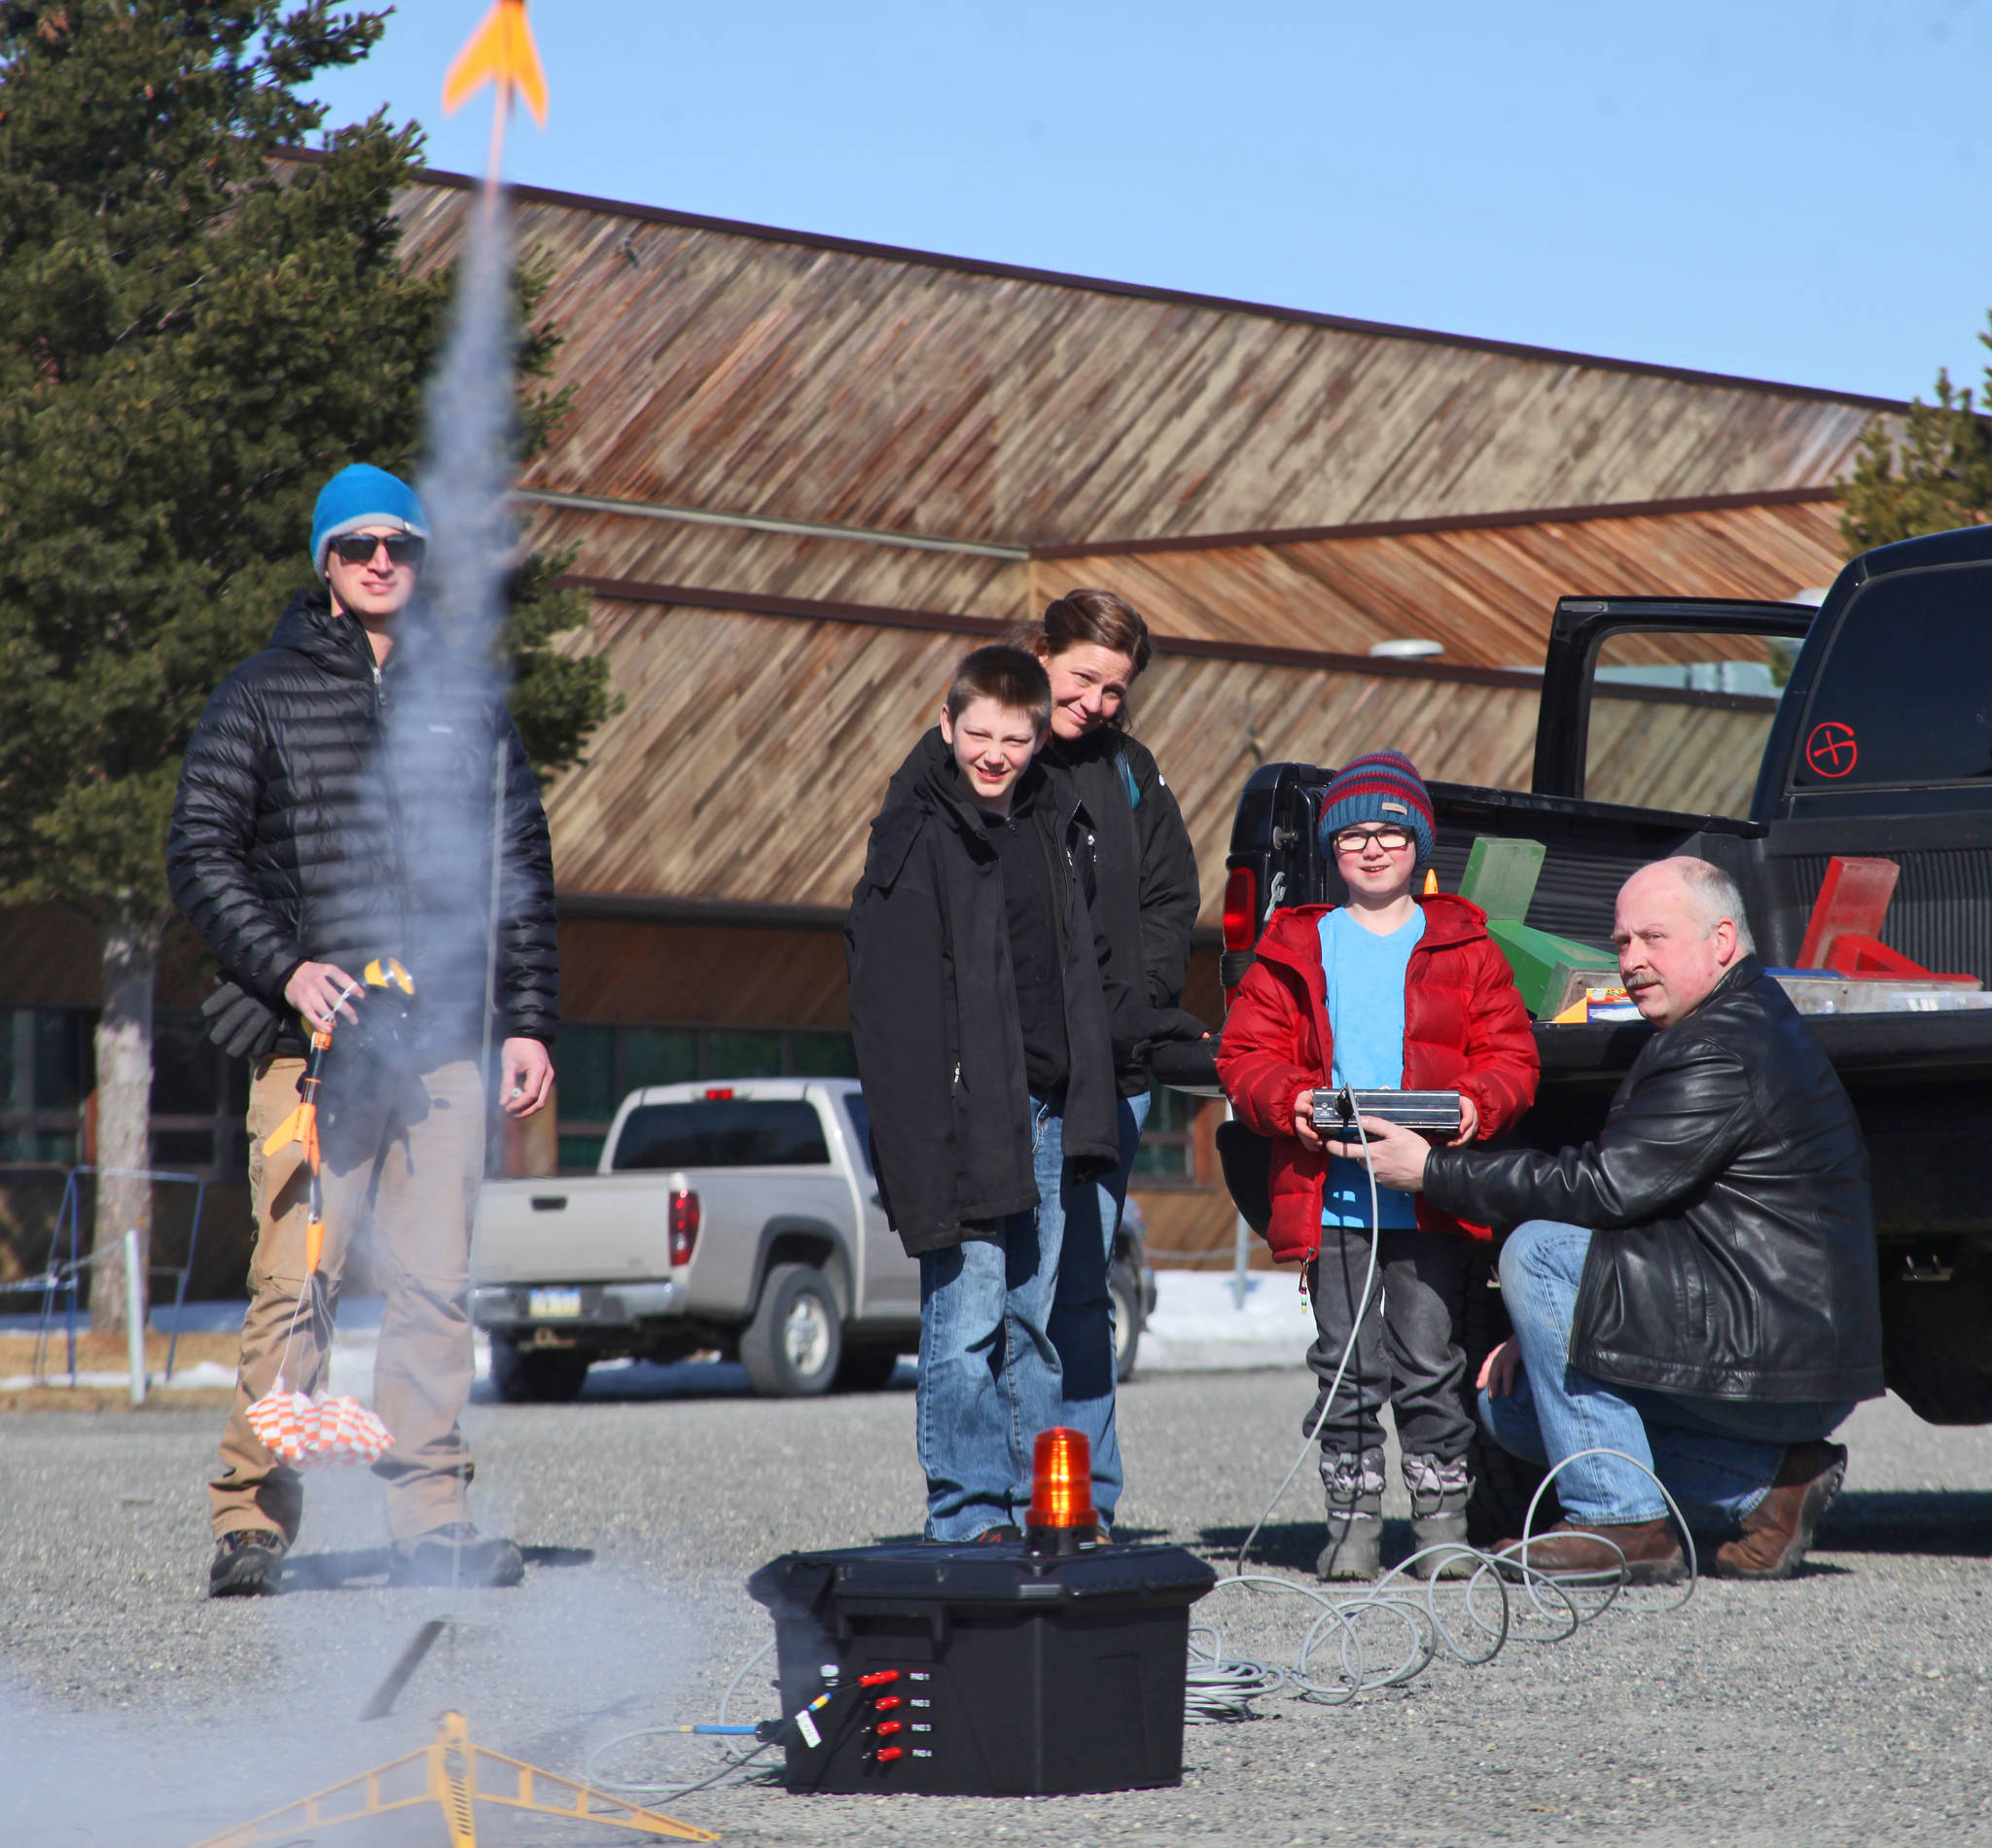 With the push of a button, Owen Walsh (in red) sends a model rocket into the sky, as instructor Scott Aleckson (right) and other students of his rocketry class watch in the parking lot of the Soldotna Regional Sports Complex in Soldotna on Saturday. Aleckson said he made and launched his first plastic, balsa wood, and cardboard rocket as a 4th grade student at Soldotna Elementary School. Since then he’s built a custom launch system, he said, “with recycled electronics and a lot of soldering time.” Aleckson taught Saturday’s rocketry class through the Soldotna Community Schools program, and would like to continue spreading the hobby. “If I could get a model rocket club going, that’d be great,” he said. “Stuff like this is much more fun in a group.” (Photo by Ben Boettger/Peninsula Clarion)